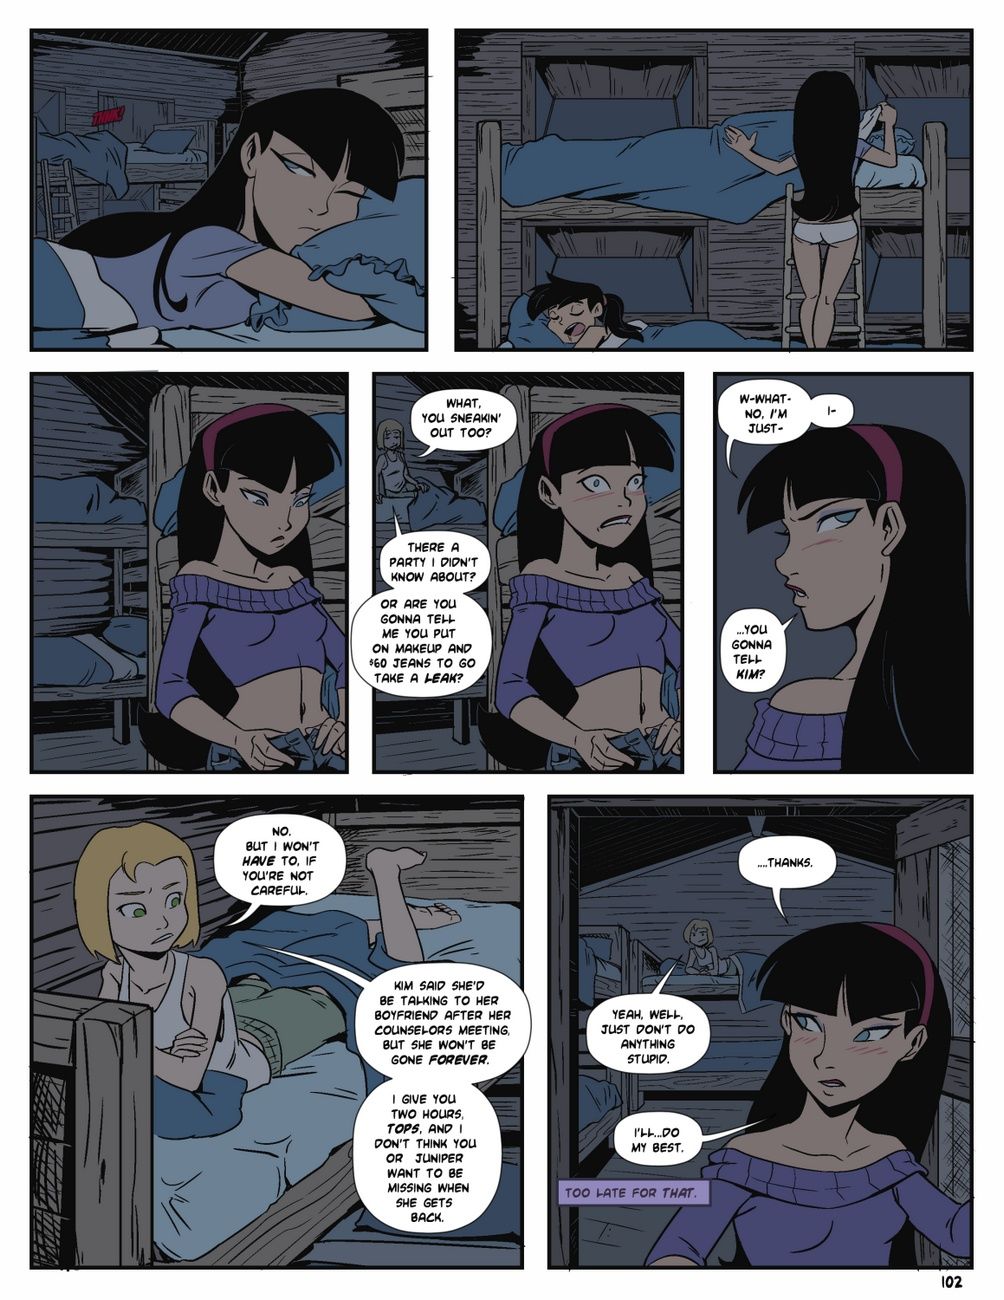 Camp Sherwood [Mr.D] (Ongoing) page 103